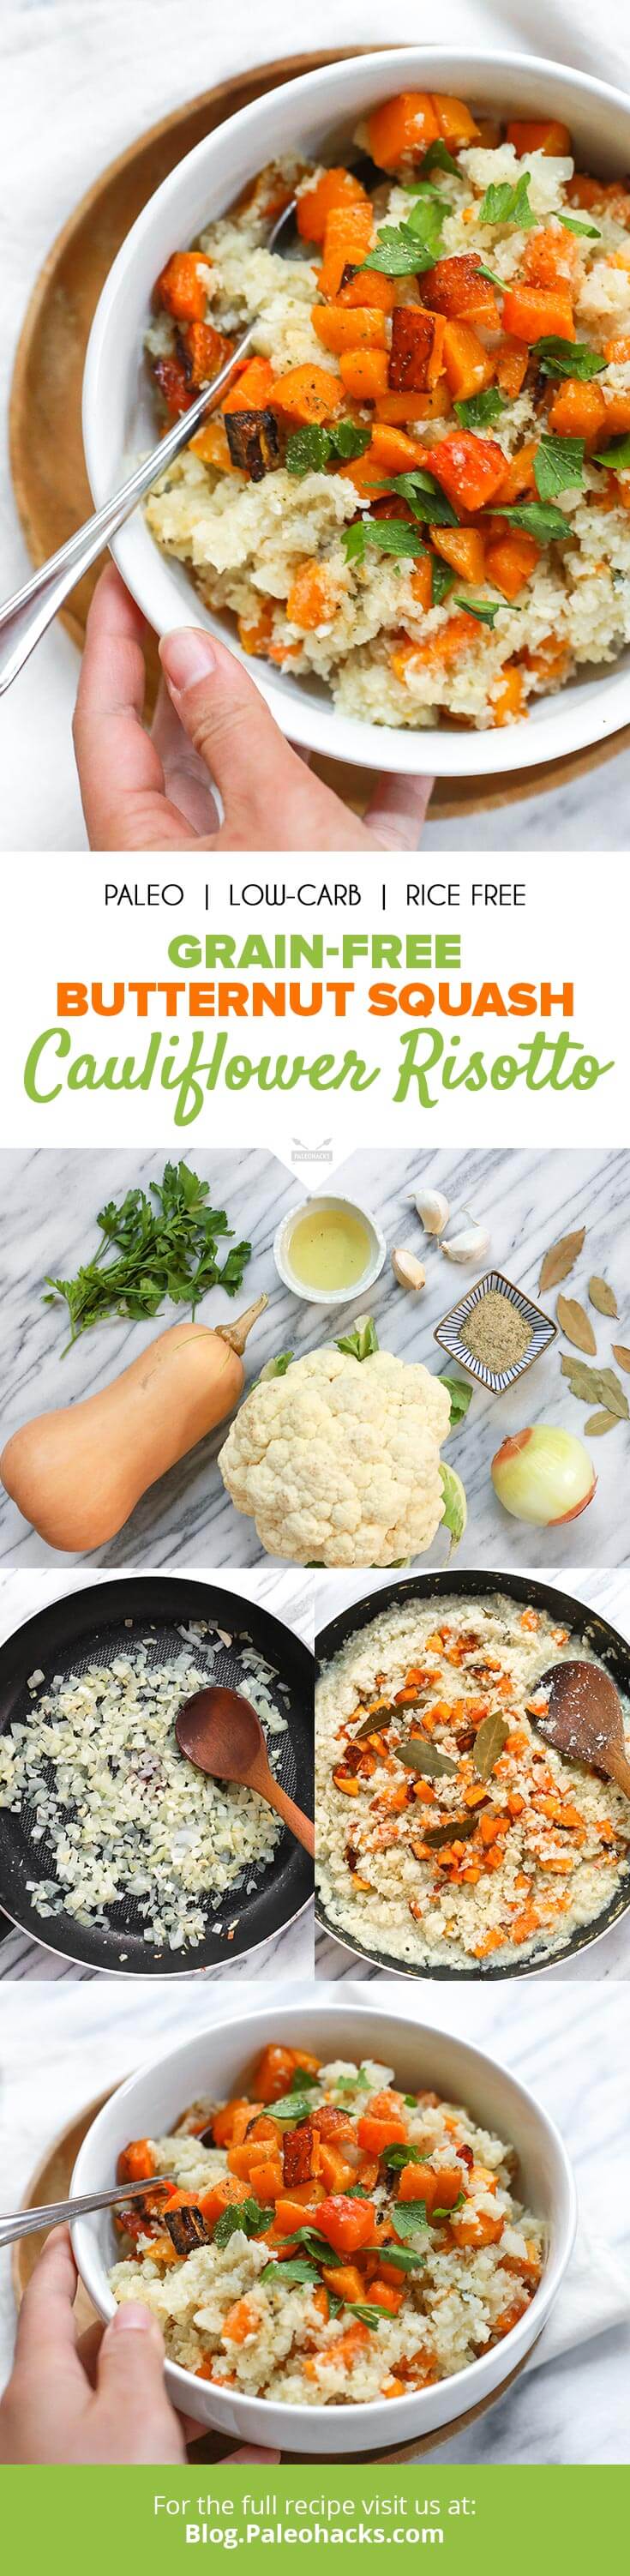 Cauliflower rice slowly simmers in cozy seasonings for an aromatic grain-free risotto topped with roasted butternut squash.